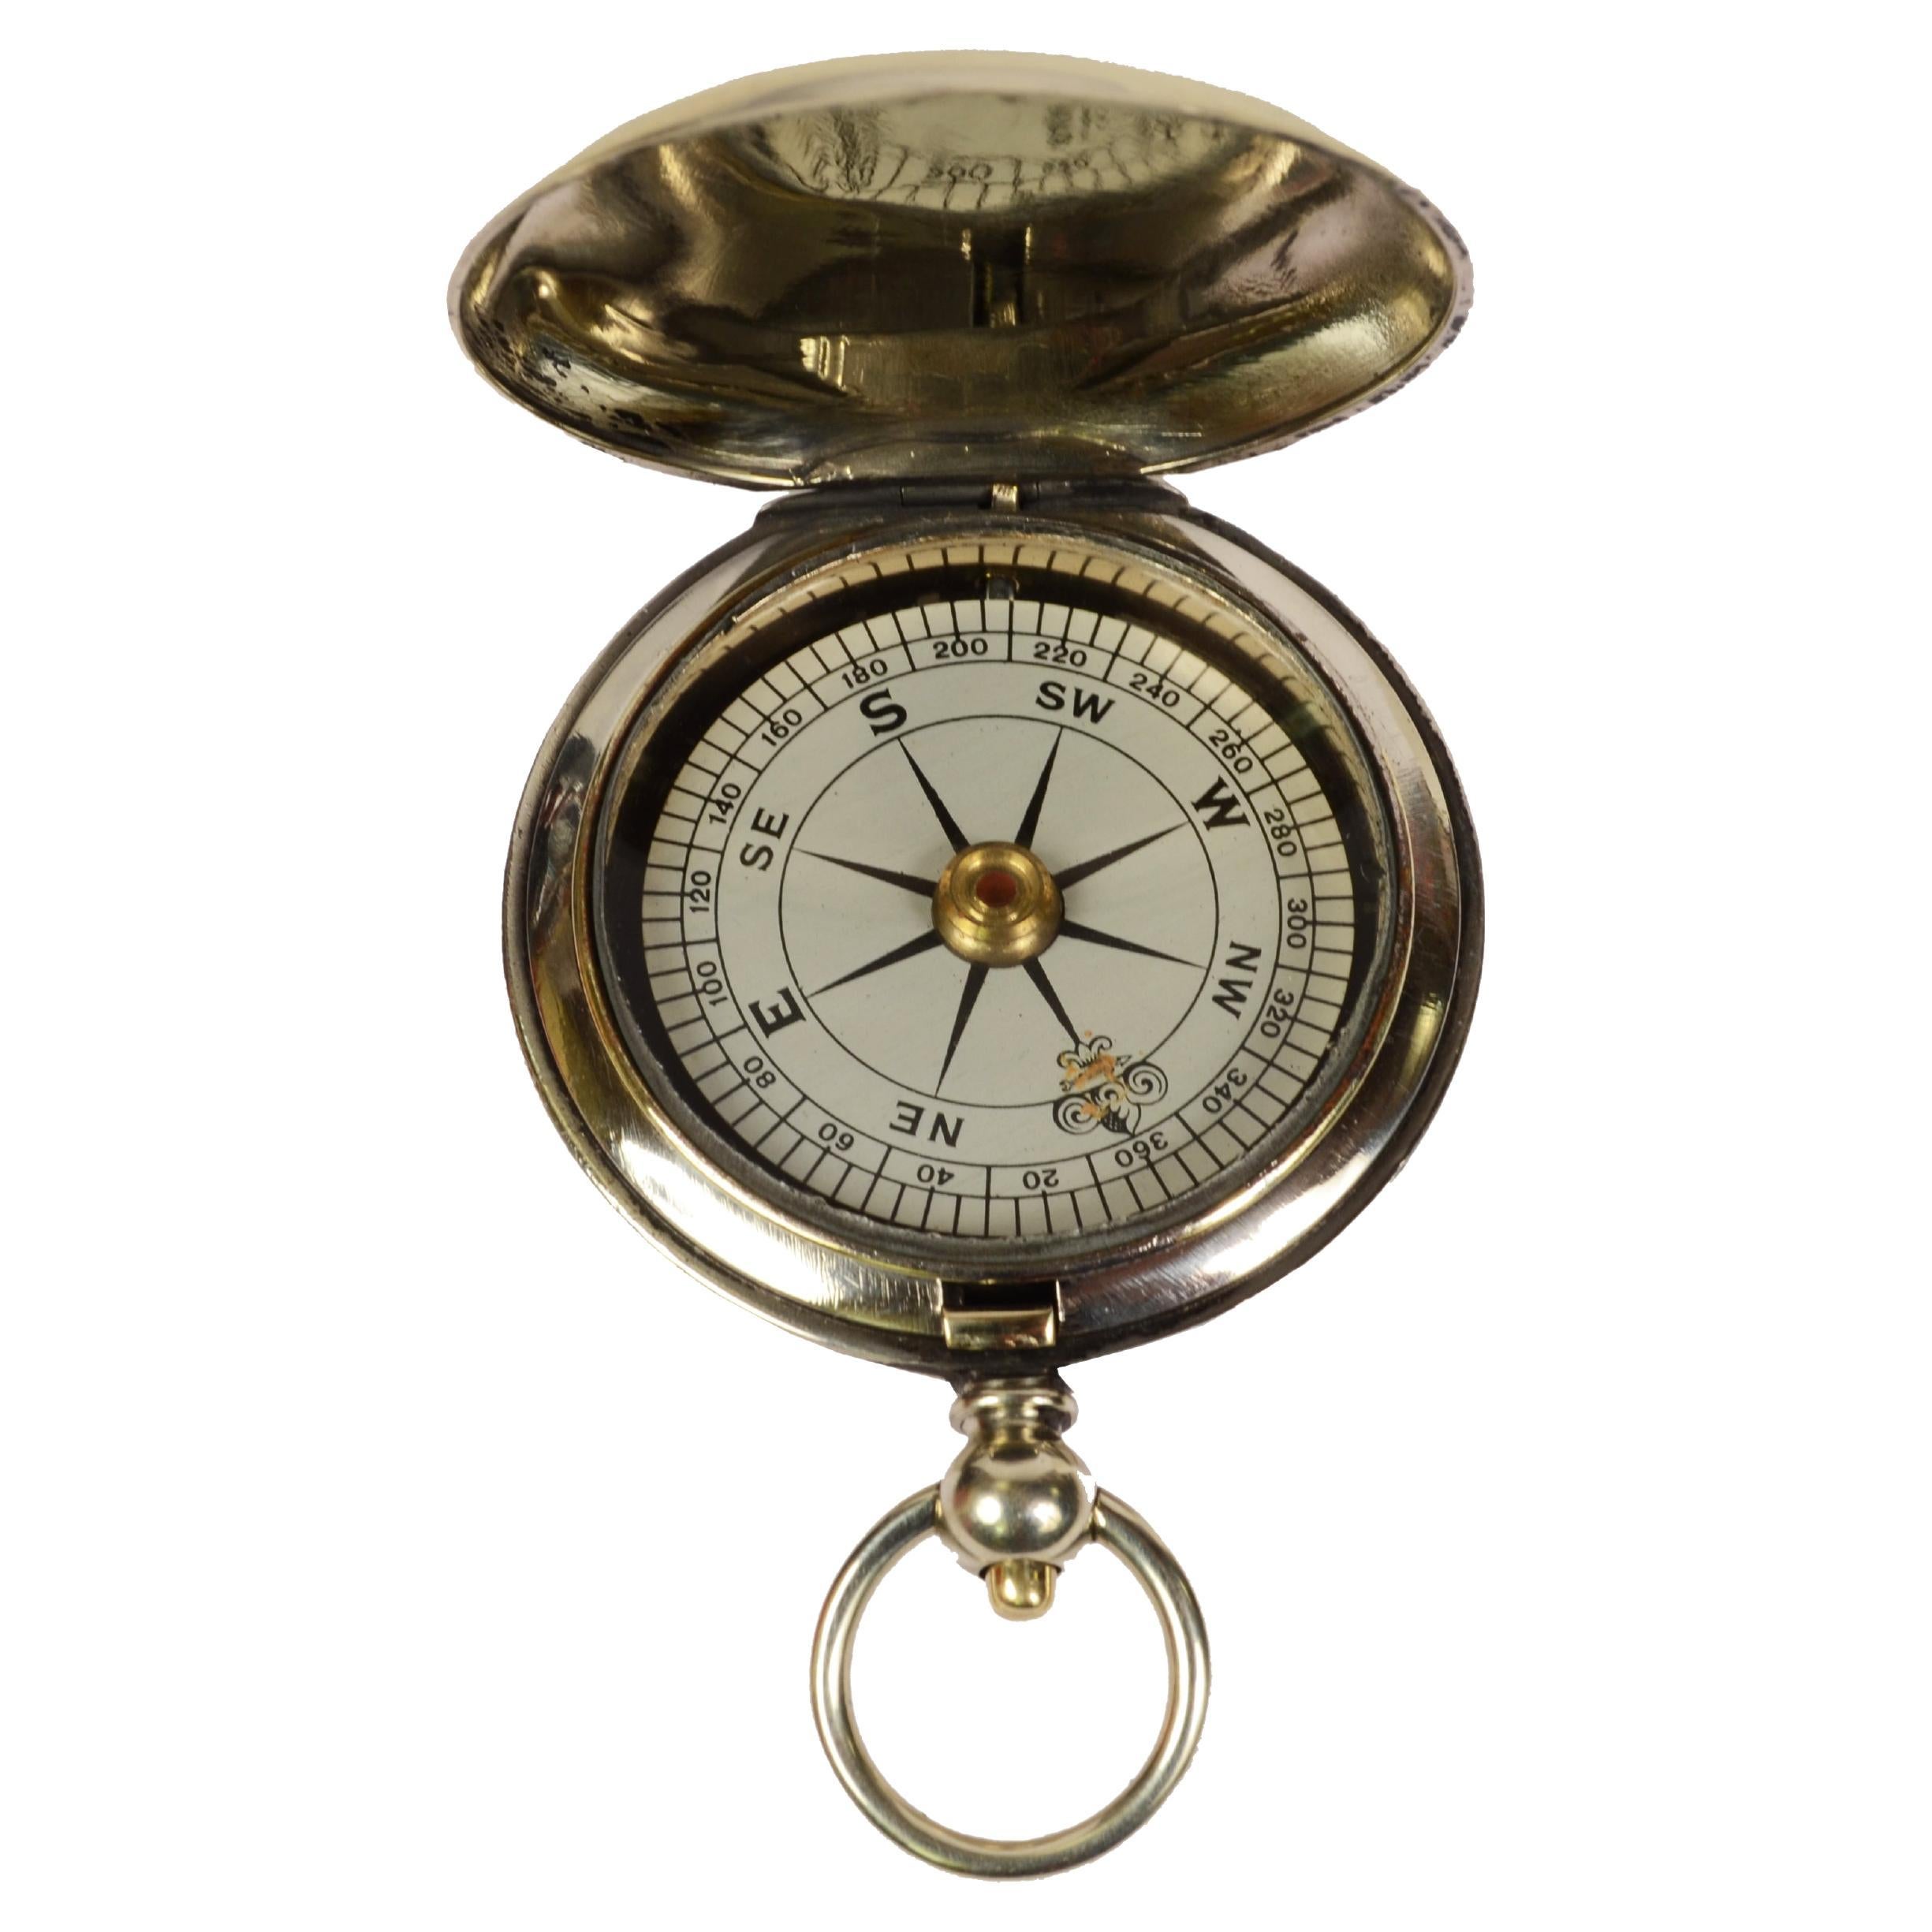 Details about   Vintage London Old Army Tracking Compass 19th Century Instrument Magnetic C 